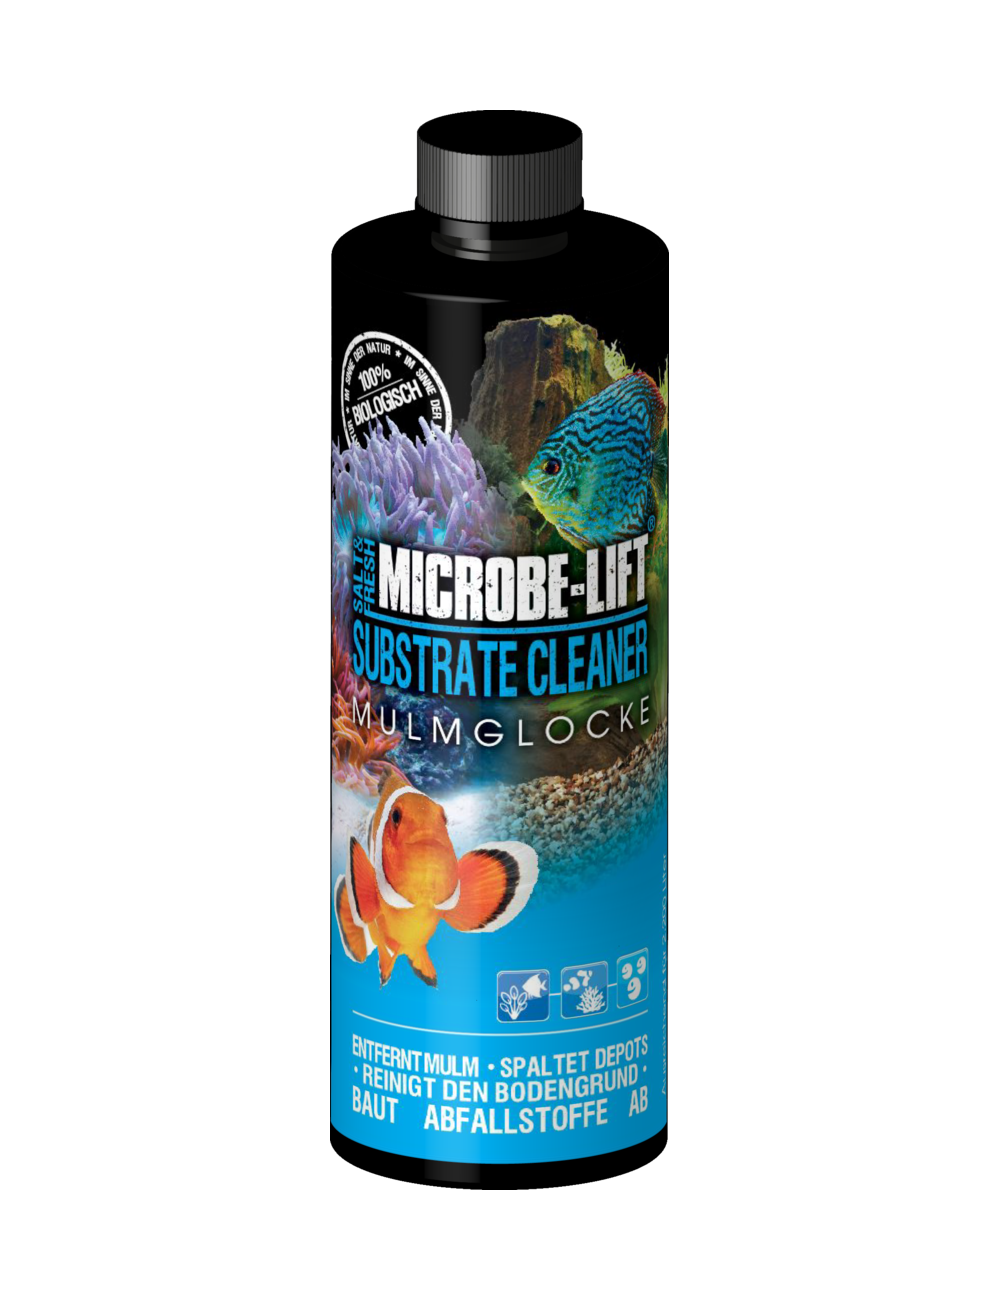 MICROBE-LIFT - Substrate Cleaner - 118ml - Nettoyant de substrat et roches Microbe-Lift - 1